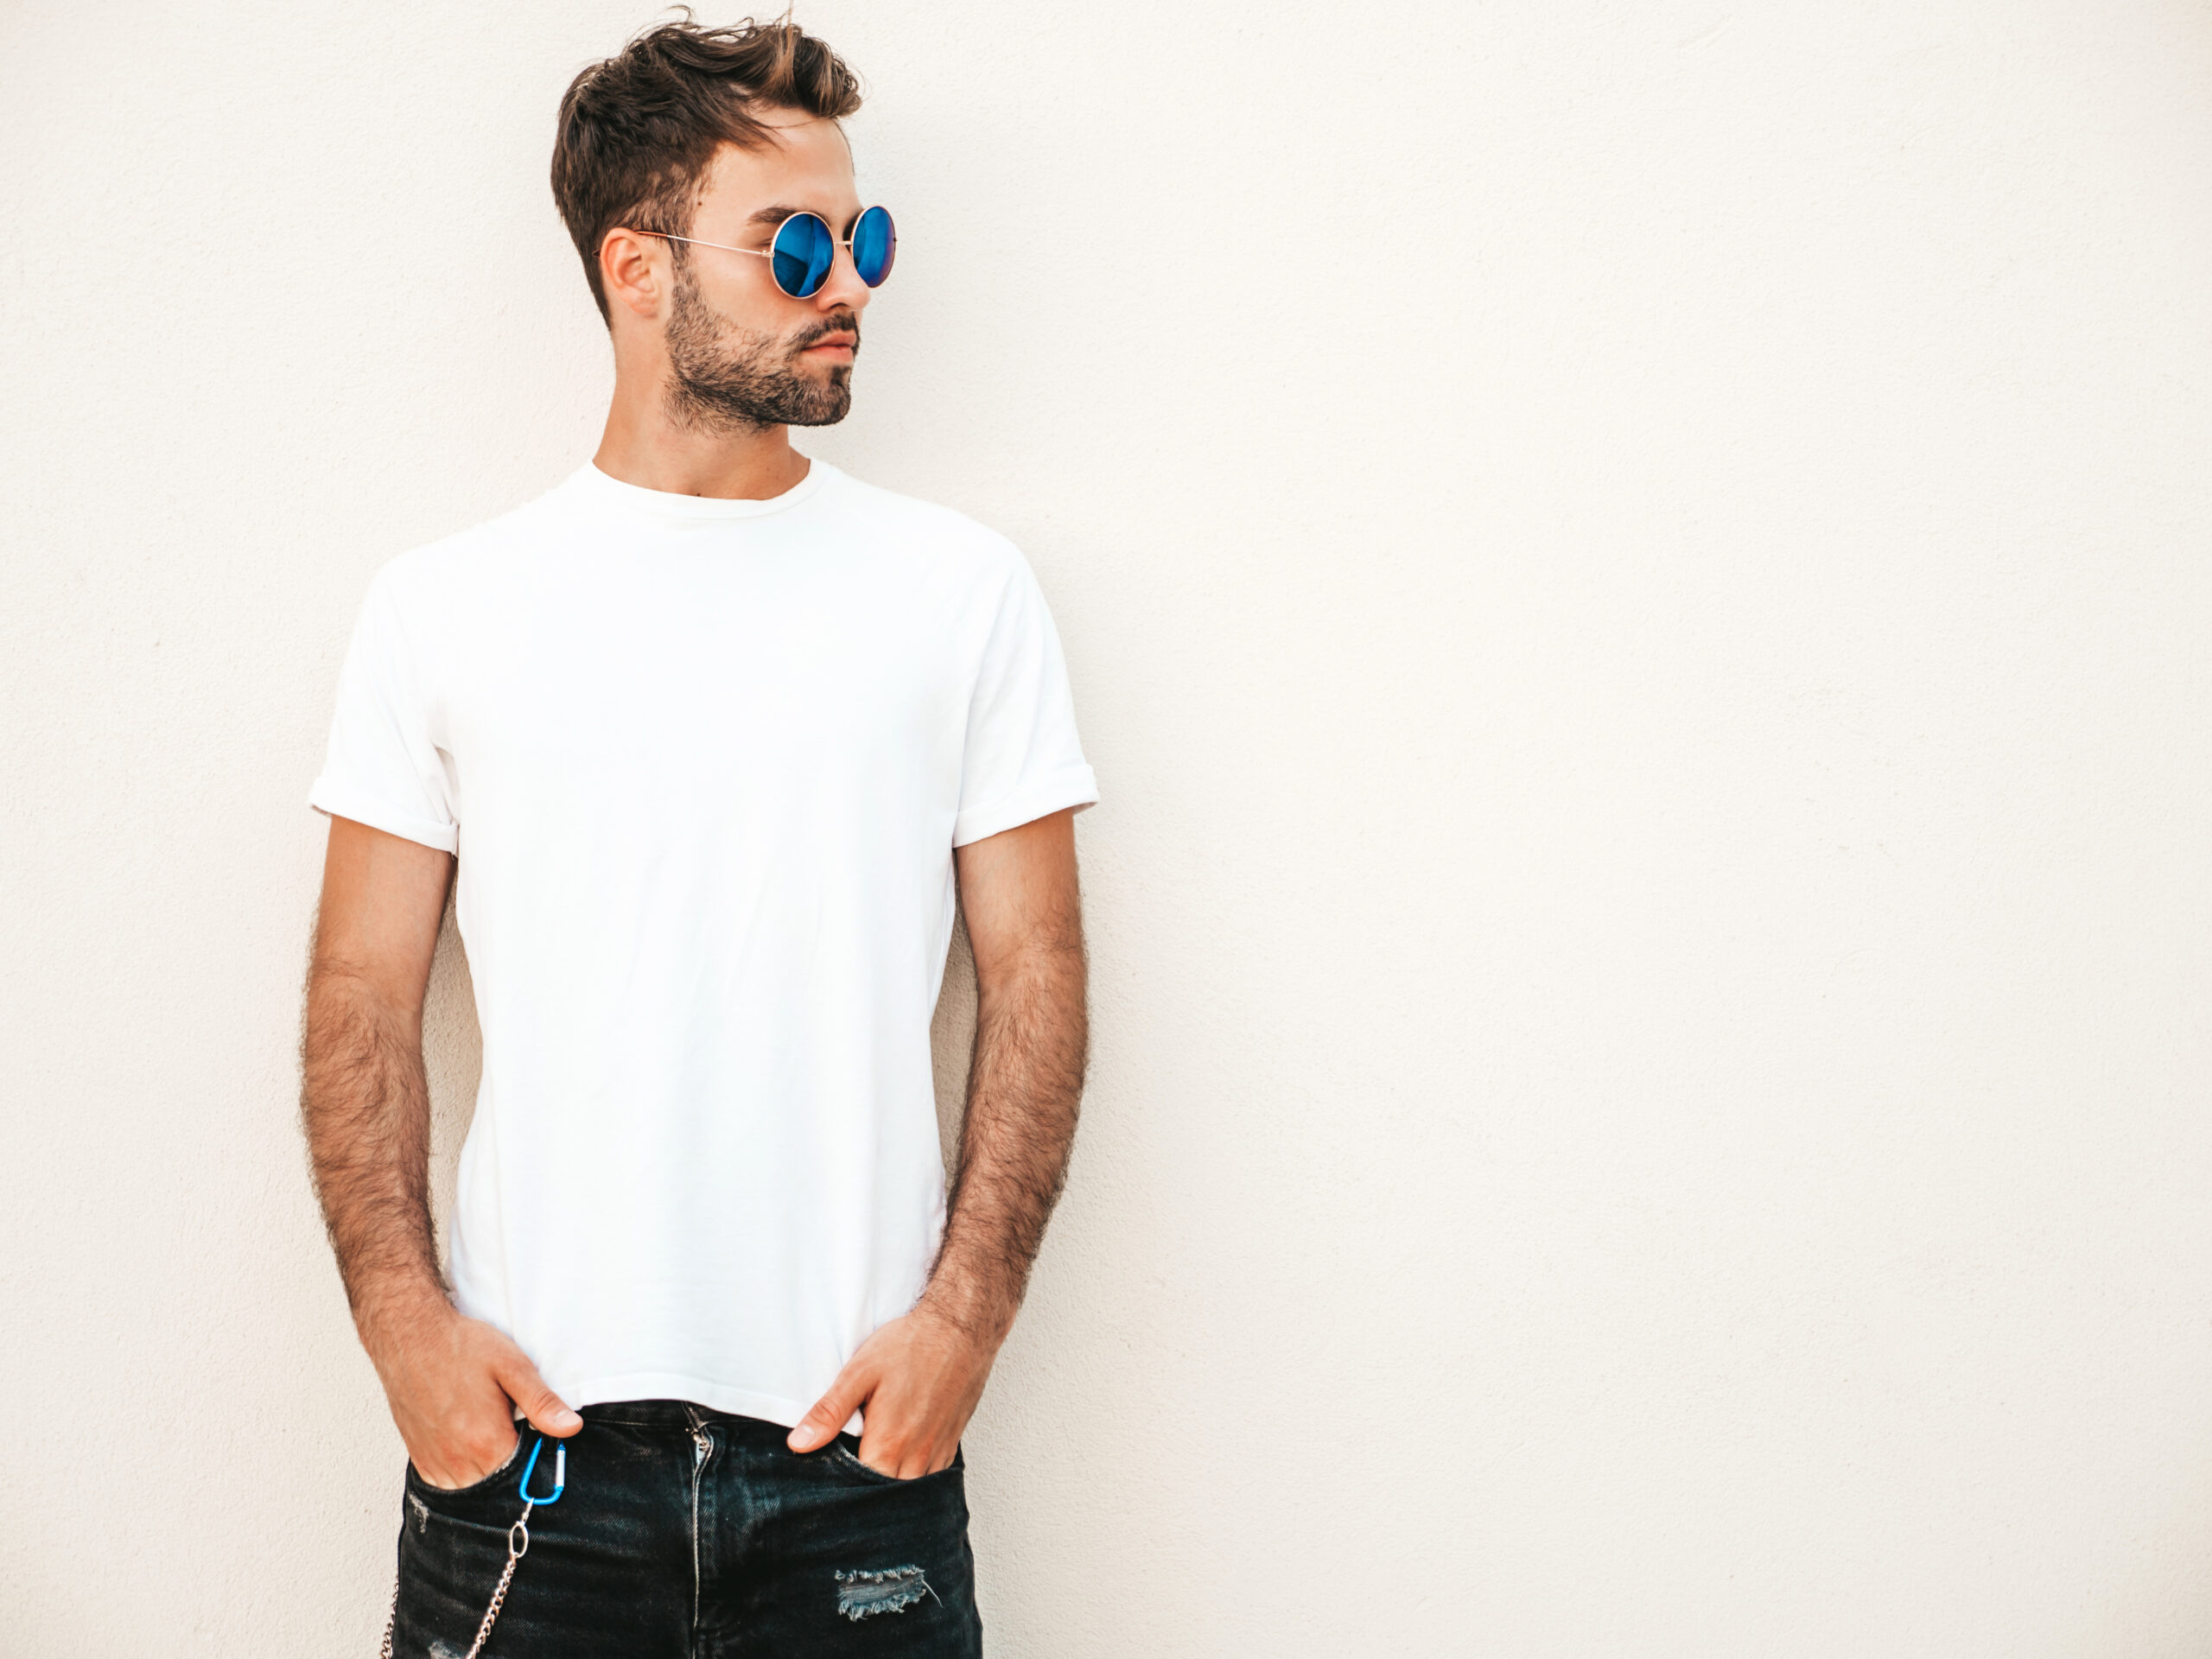 Portrait of handsome confident stylish hipster lambersexual model.Man dressed in white T-shirt. Fashion male posing on the street background near wall in sunglasses outdoors